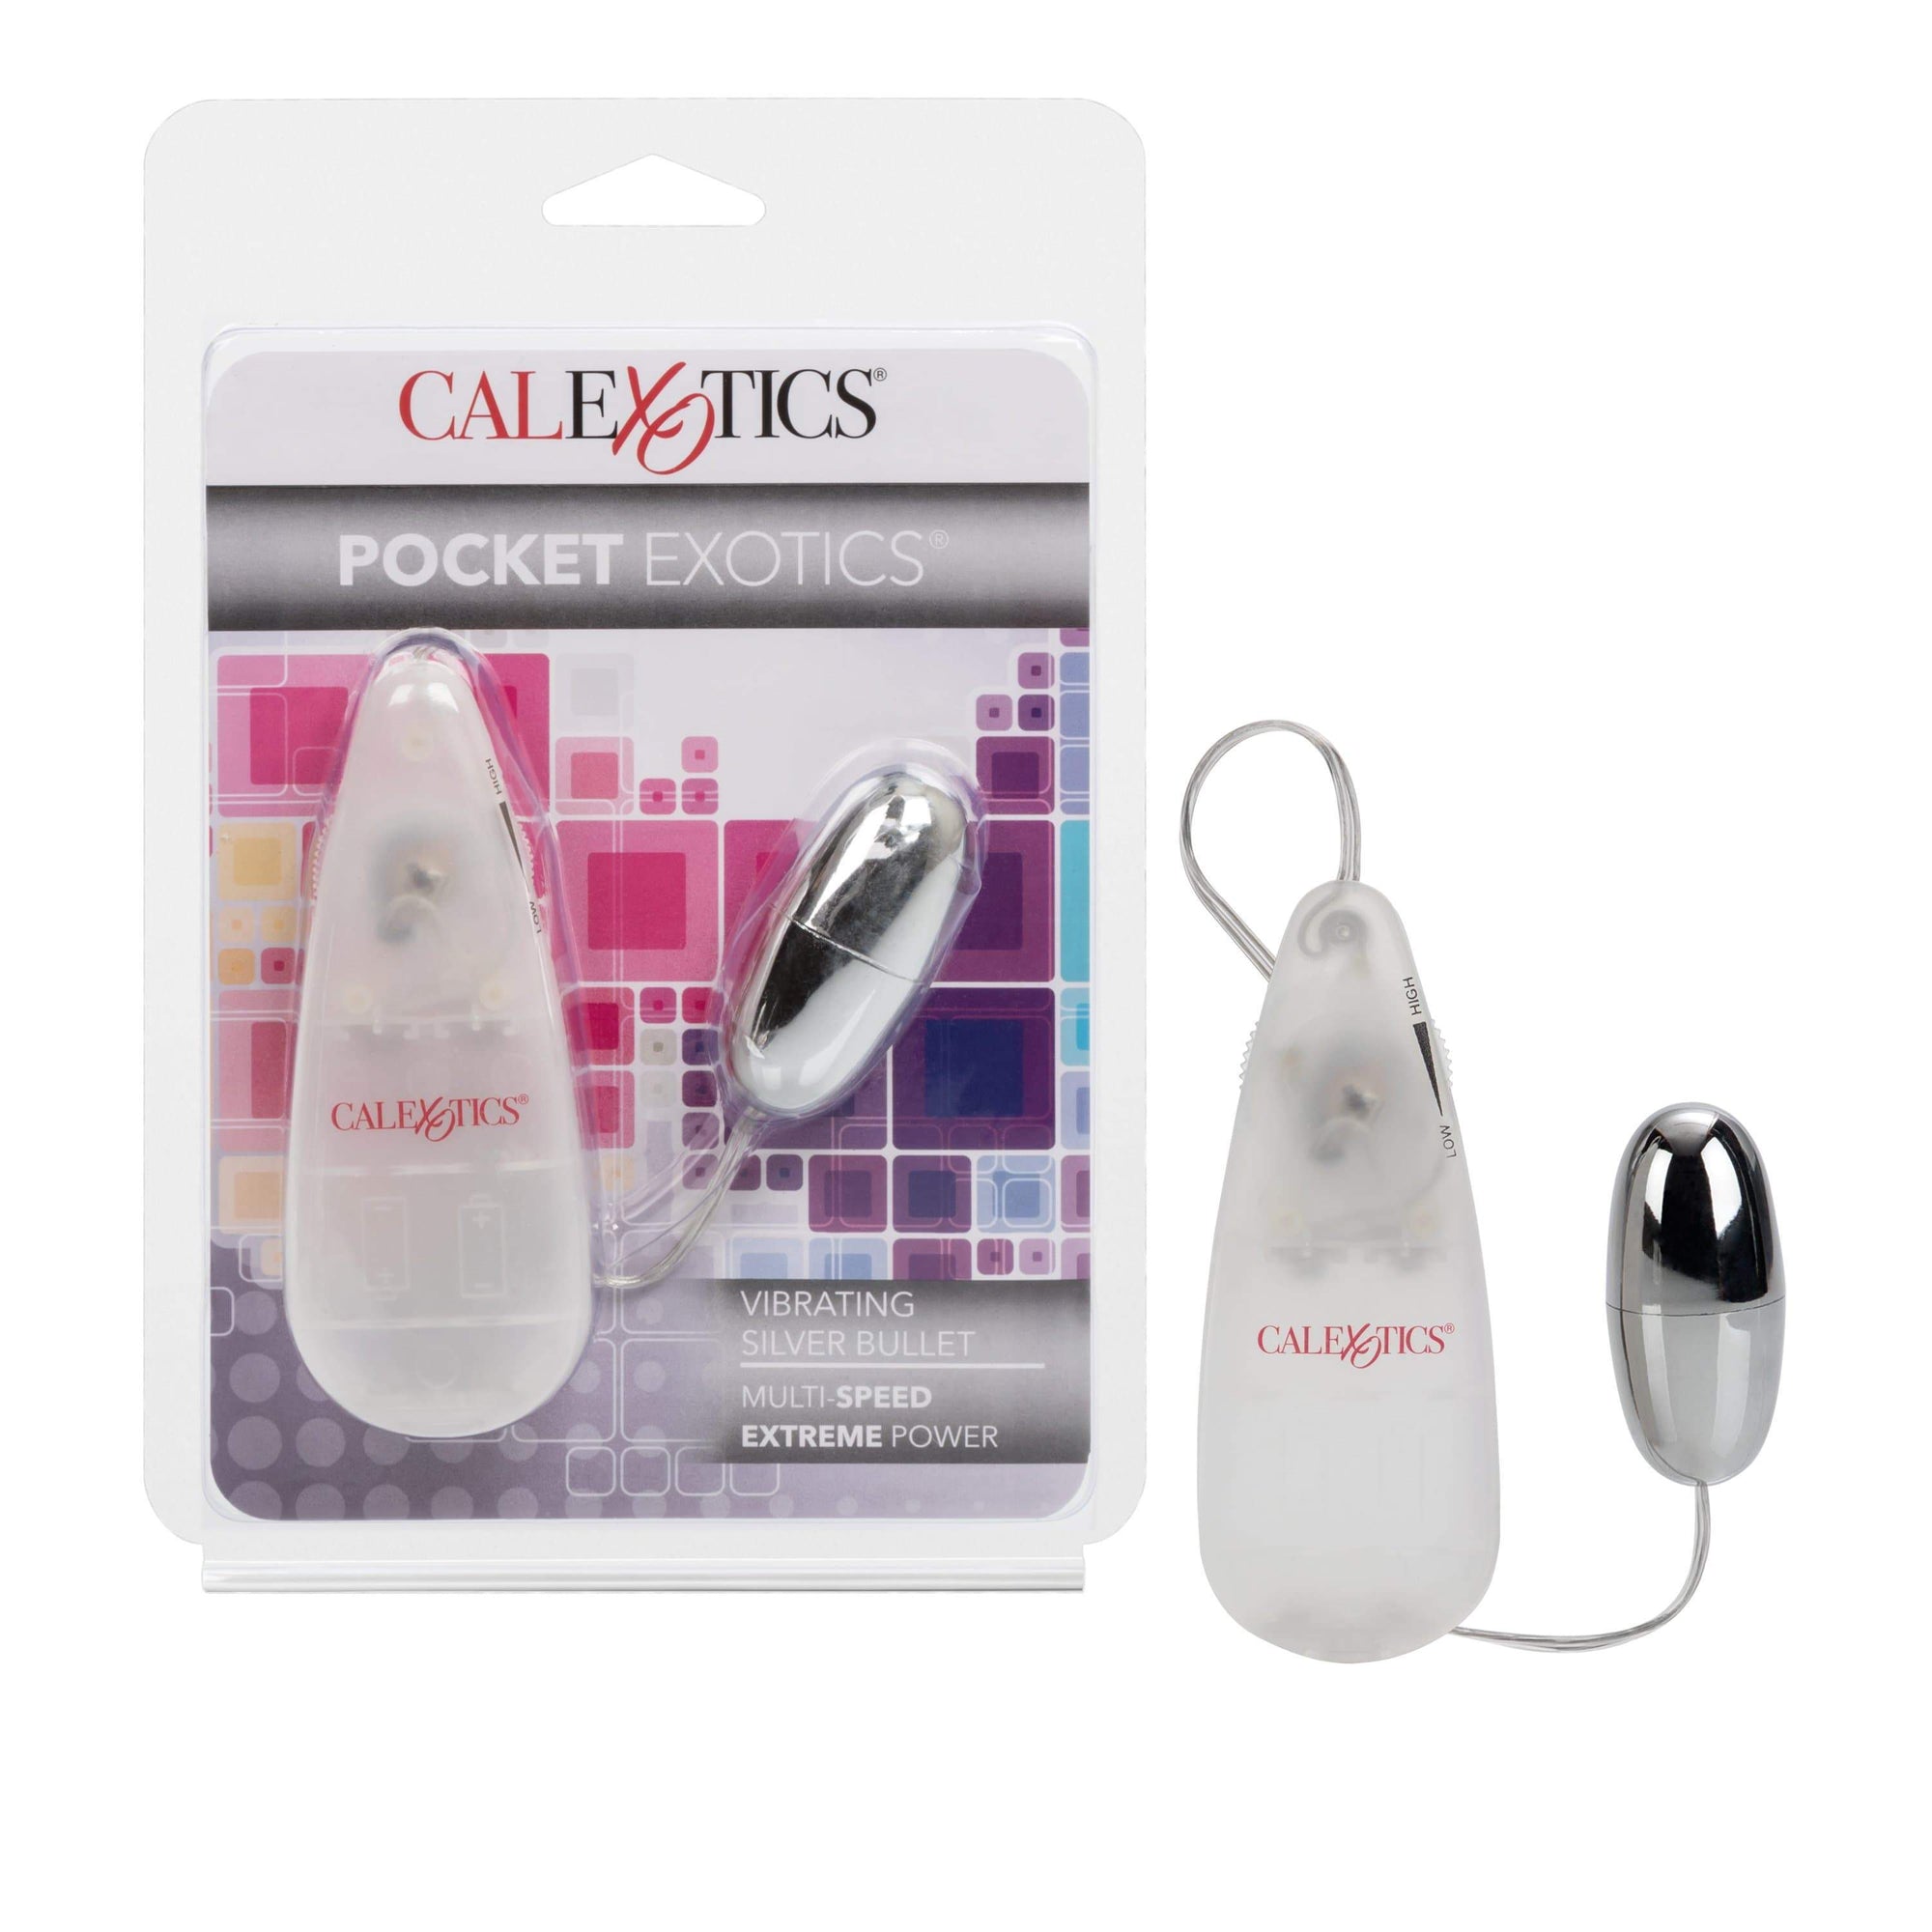 California Exotics - Pocket Exotics Vibrating Silver Bullet with Remote (SIlver) Wired Remote Control Egg (Vibration) Non Rechargeable 716770004024 CherryAffairs